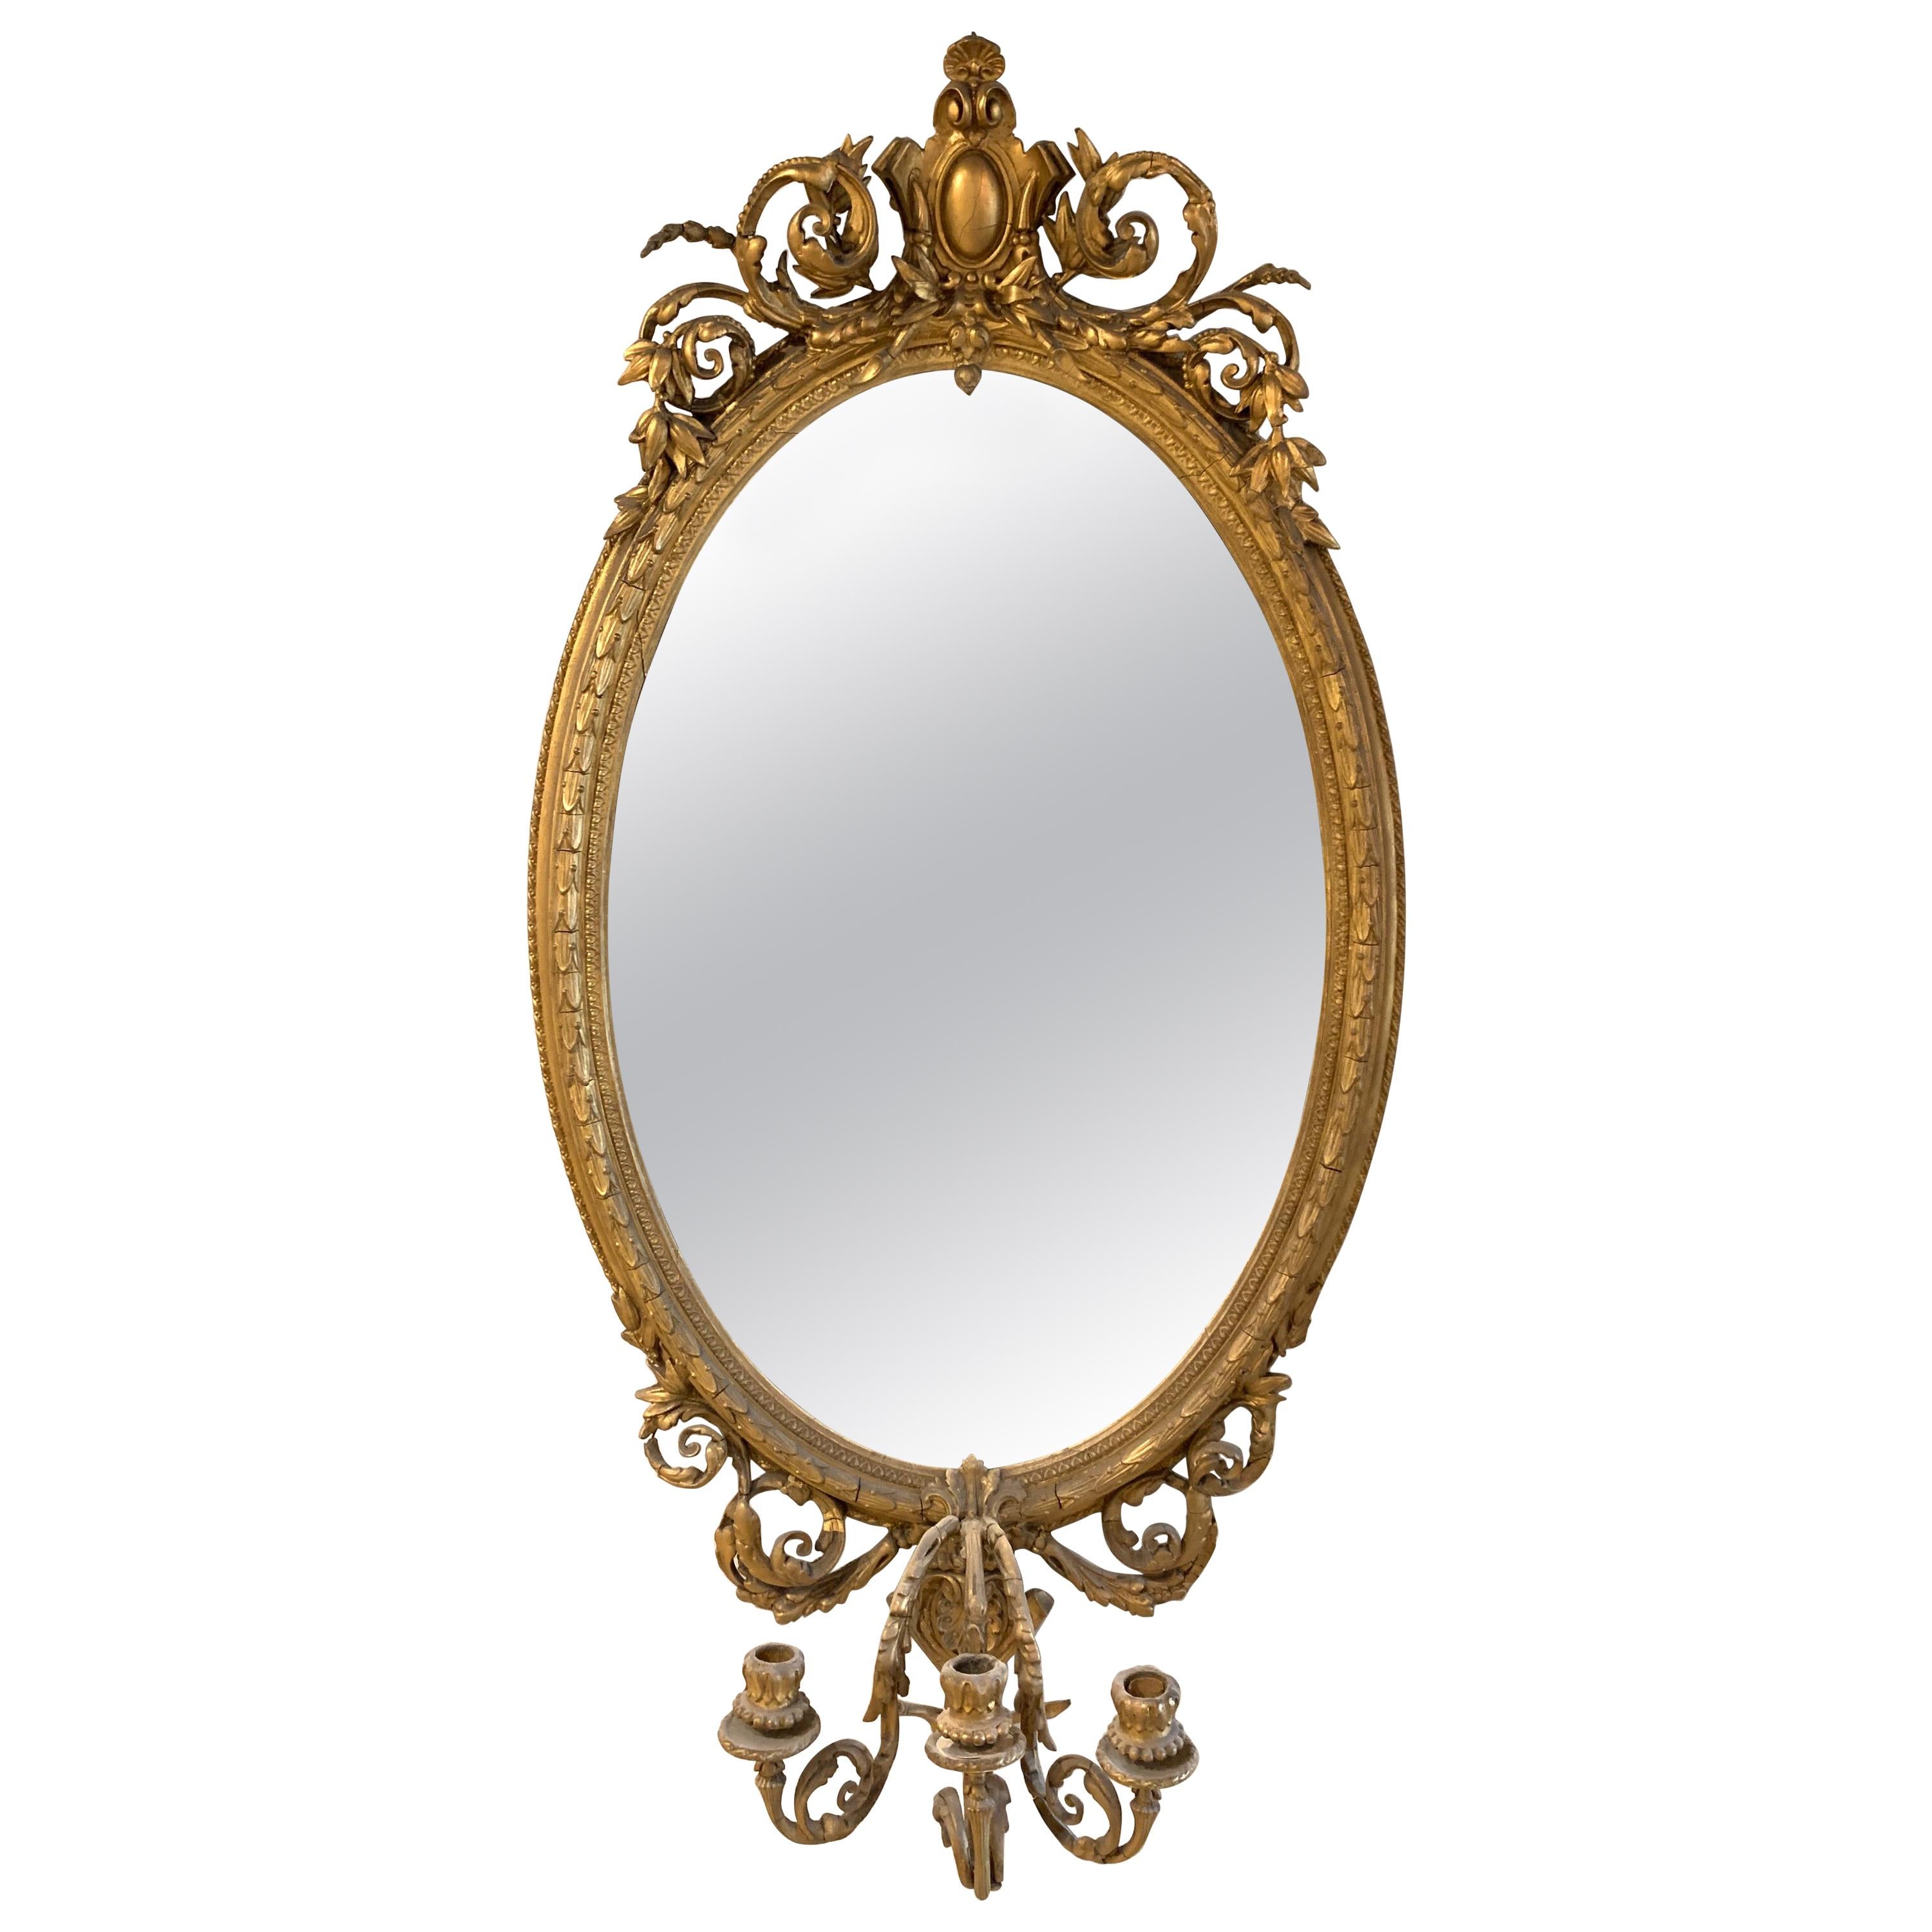 19th Century French Carved and Giltwood Oval Mirror with 3-Arm Sconce